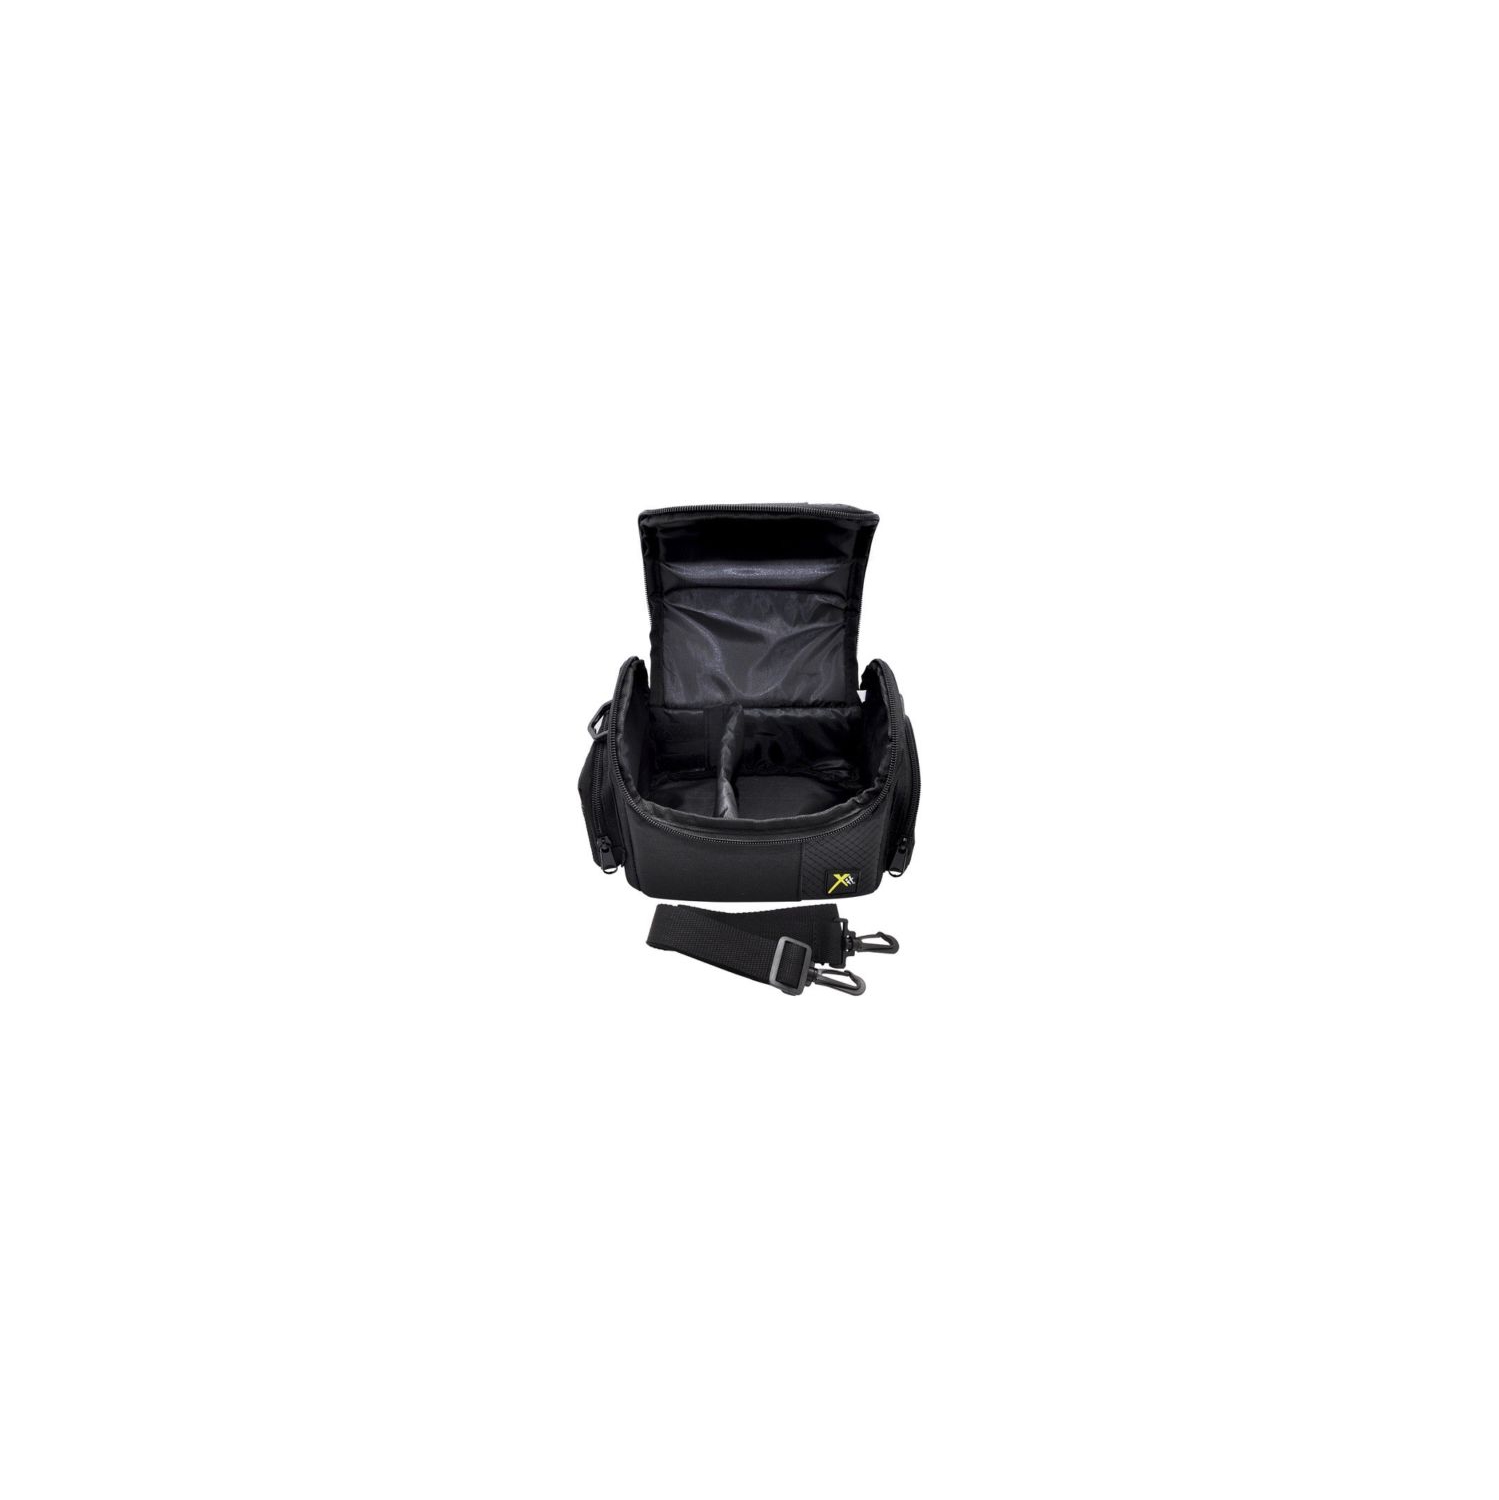 Compact Camera Case Carrying Bag For Sony Alpha A6300 ILCE-6300